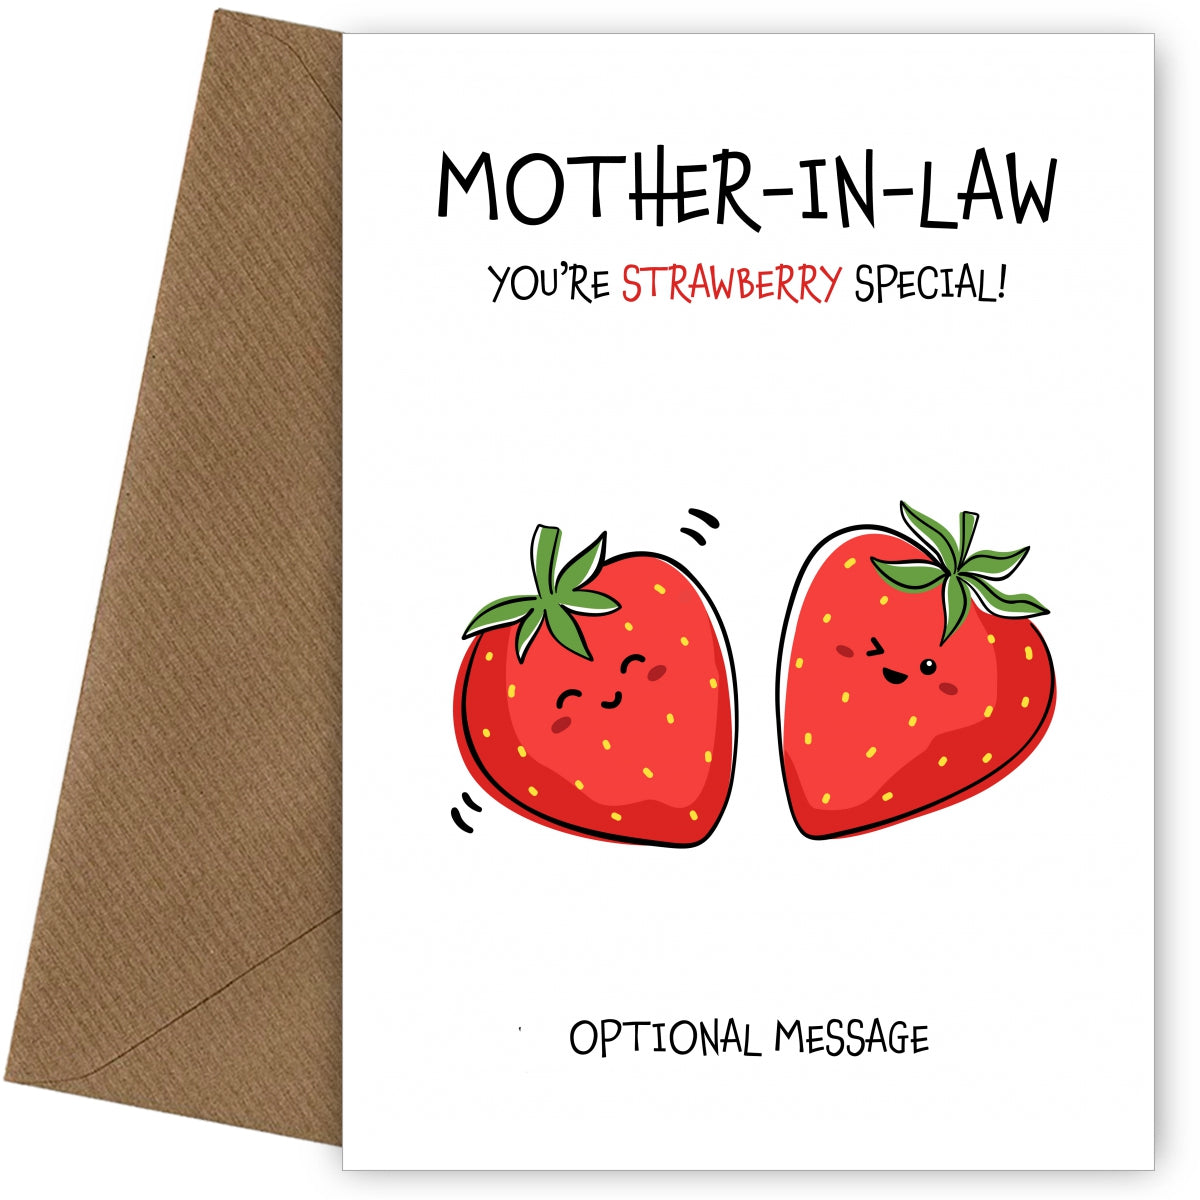 Fruit Pun Birthday Day Card for Mother-in-law - So Very Special